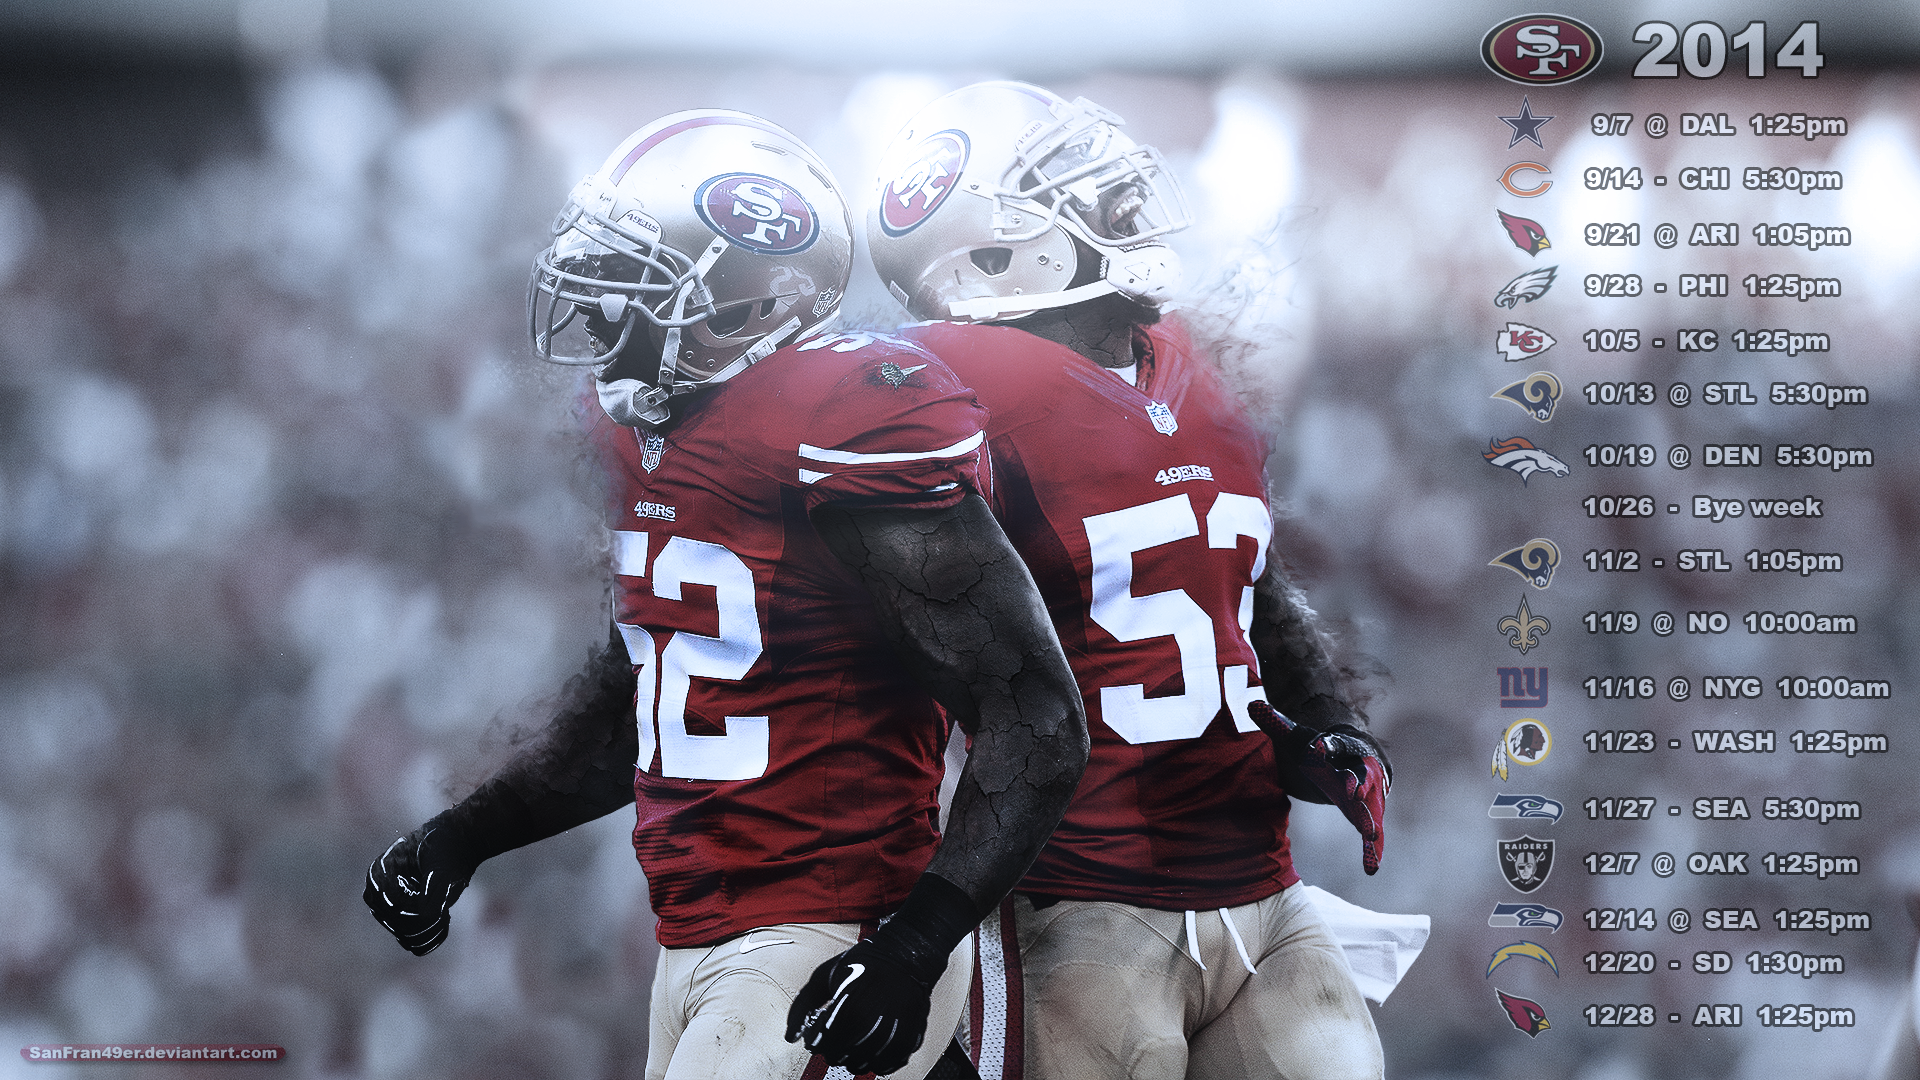 49ers Schedule Wallpaper Here S A San Francisco